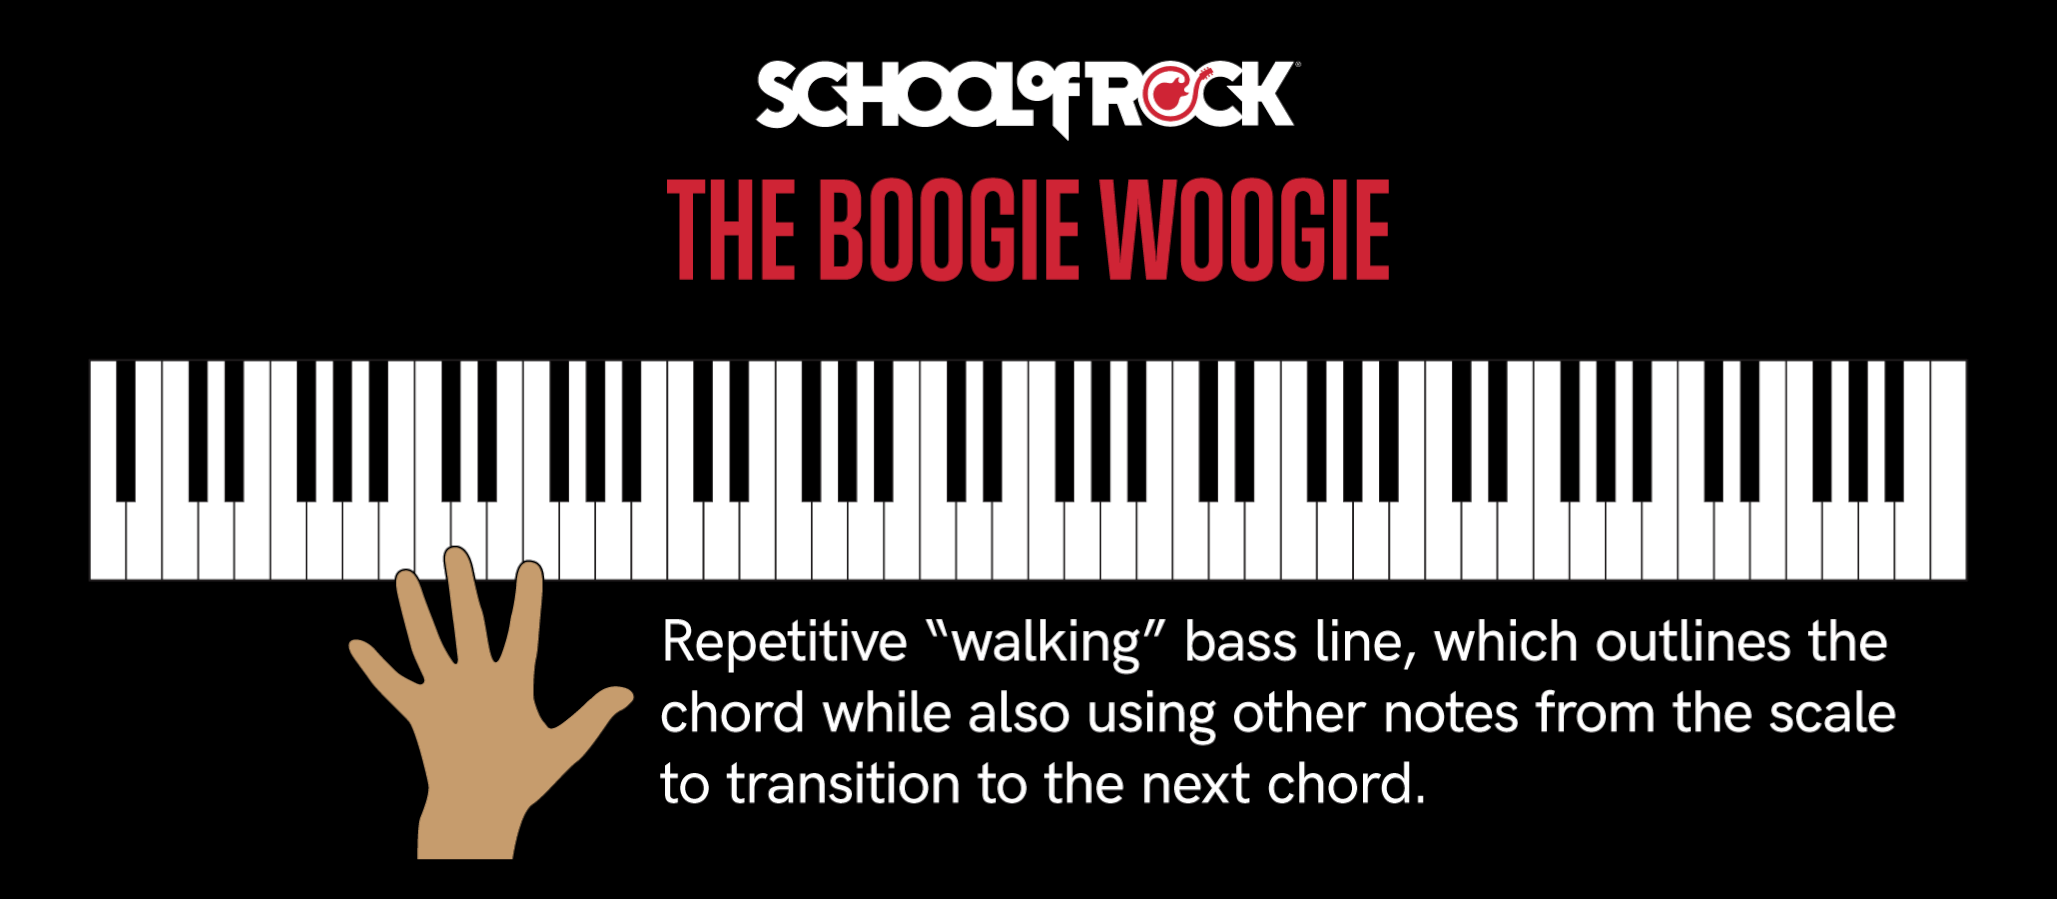 The left-hand rhythmic pattern known as “boogie woogie”